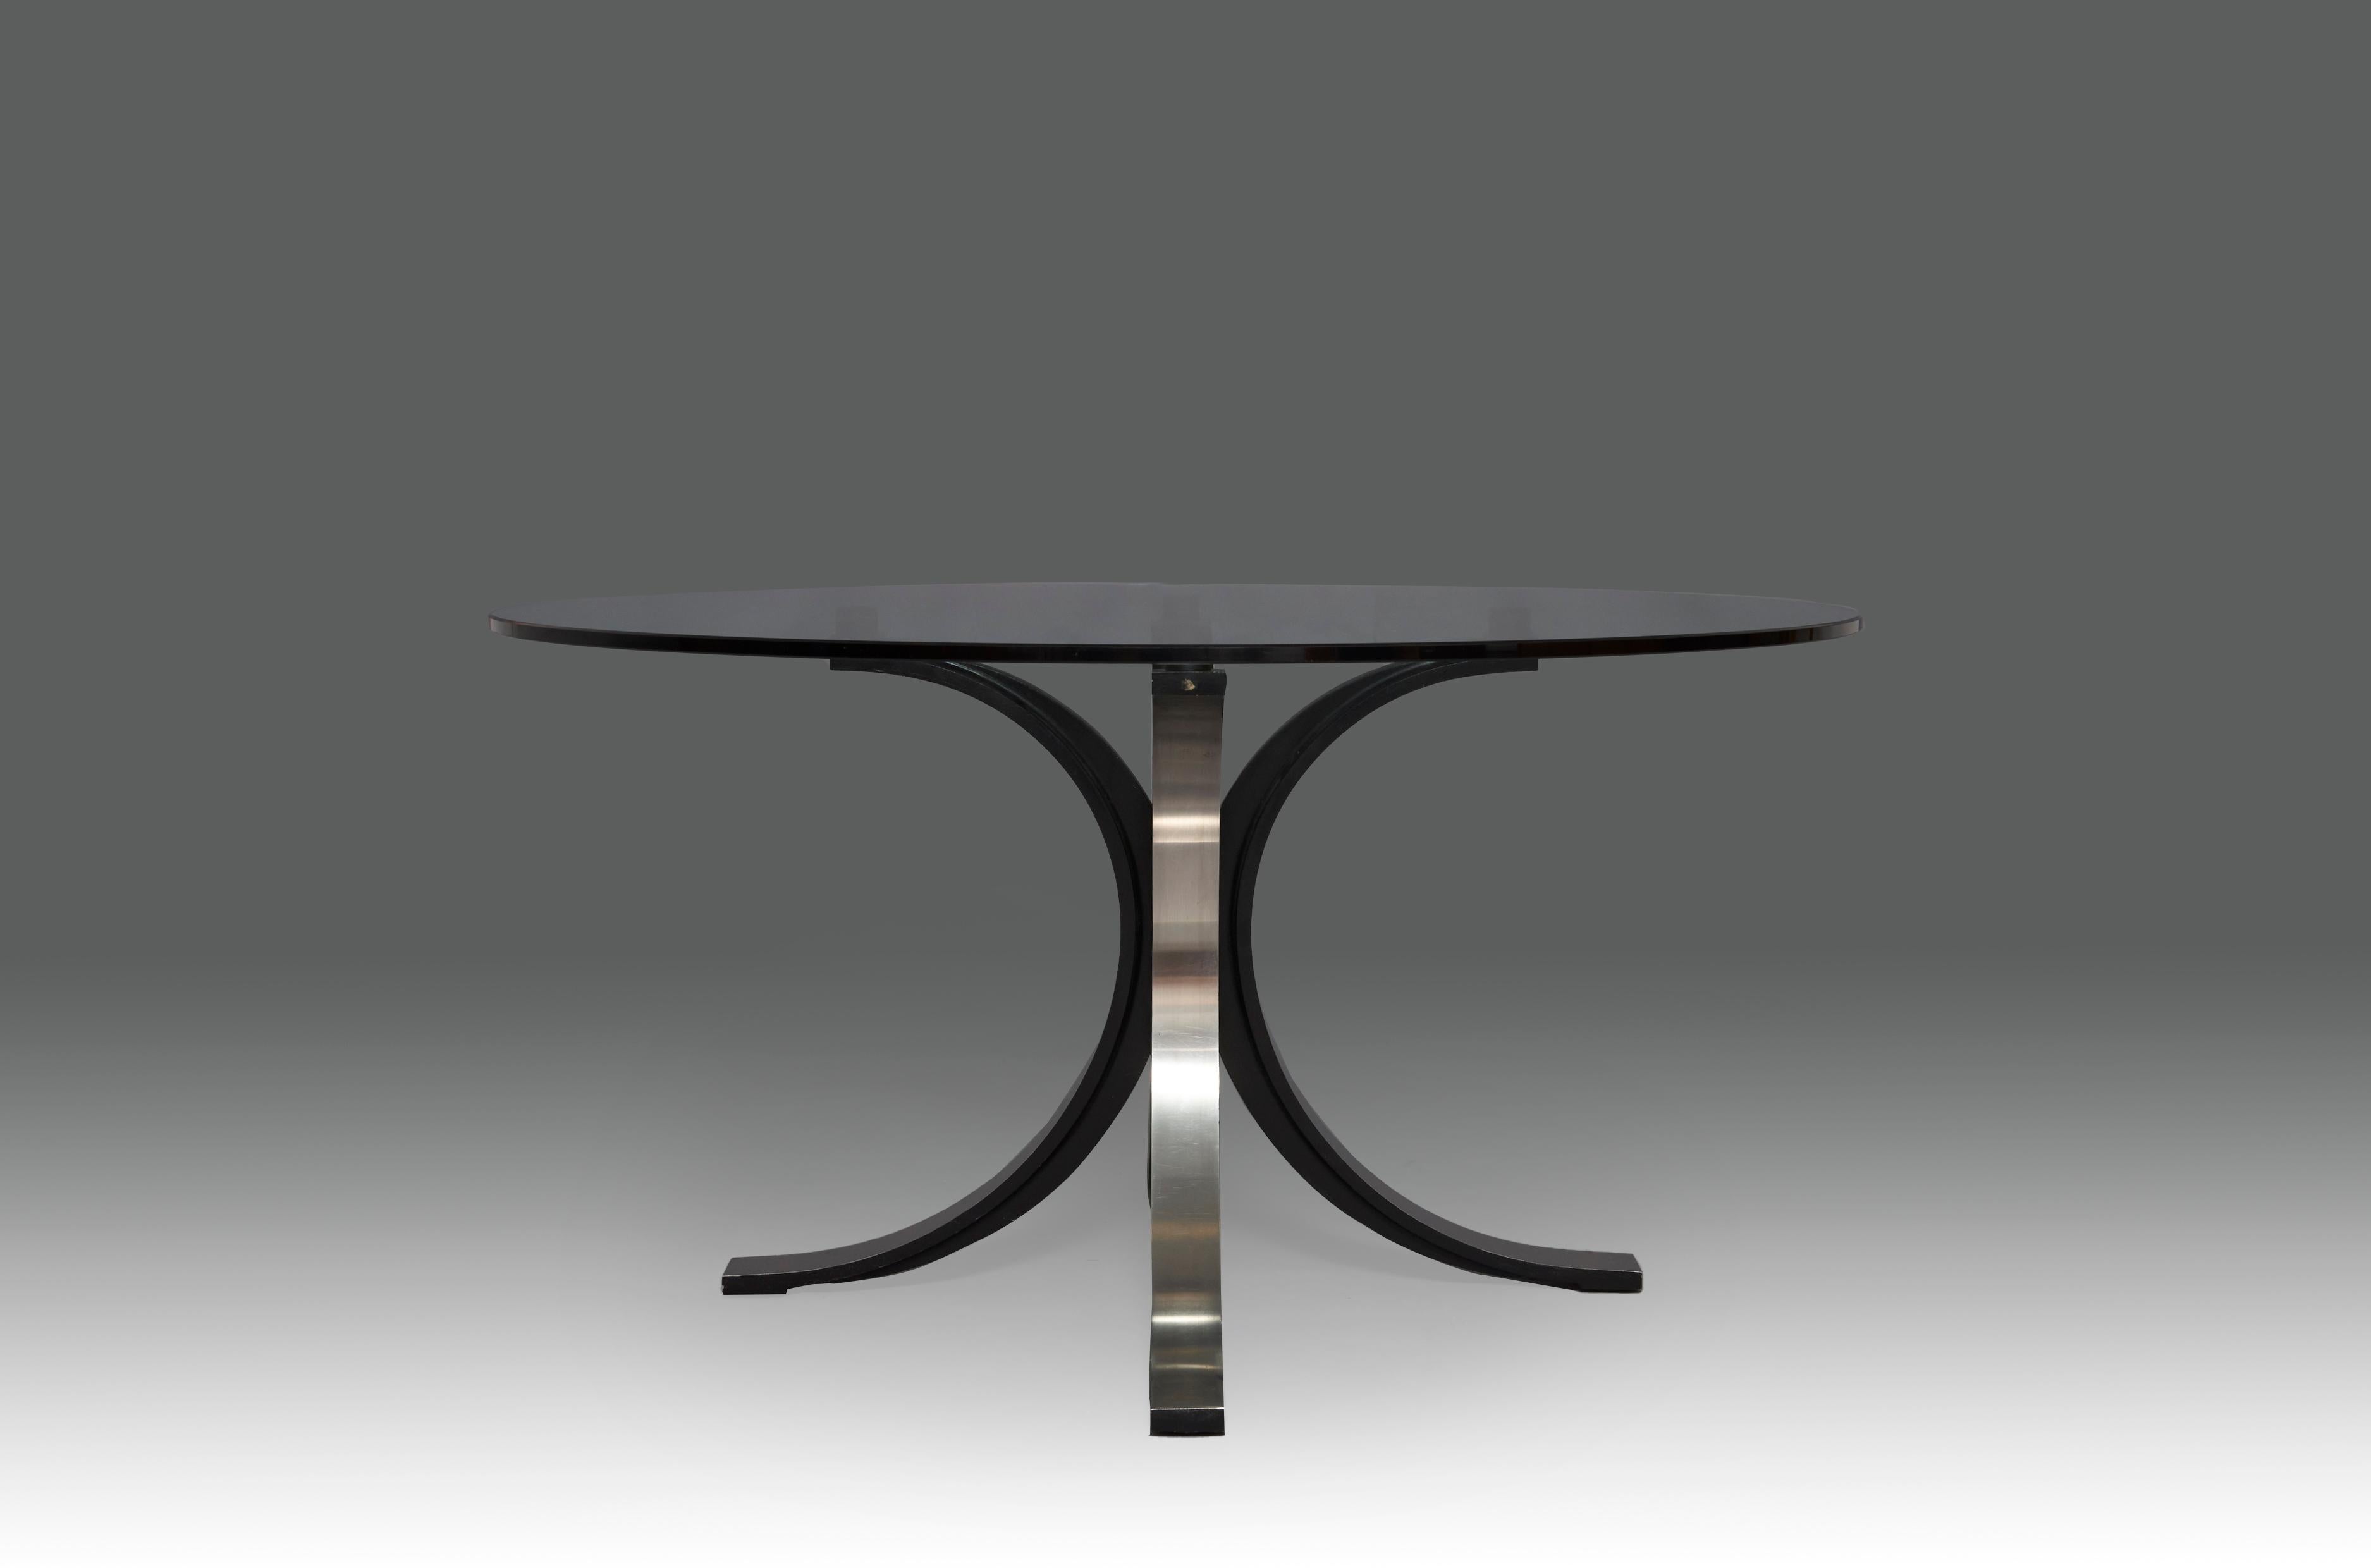 Dining table designed by Osvaldo Borsani & Eugenio Gerli for TECNO. Italy, 1960s. Matte-black laquered cast aluminum with brush steel foil and glass table top. In an excellent condition. 

Osvaldo Borsani was an Italian architect and designer who